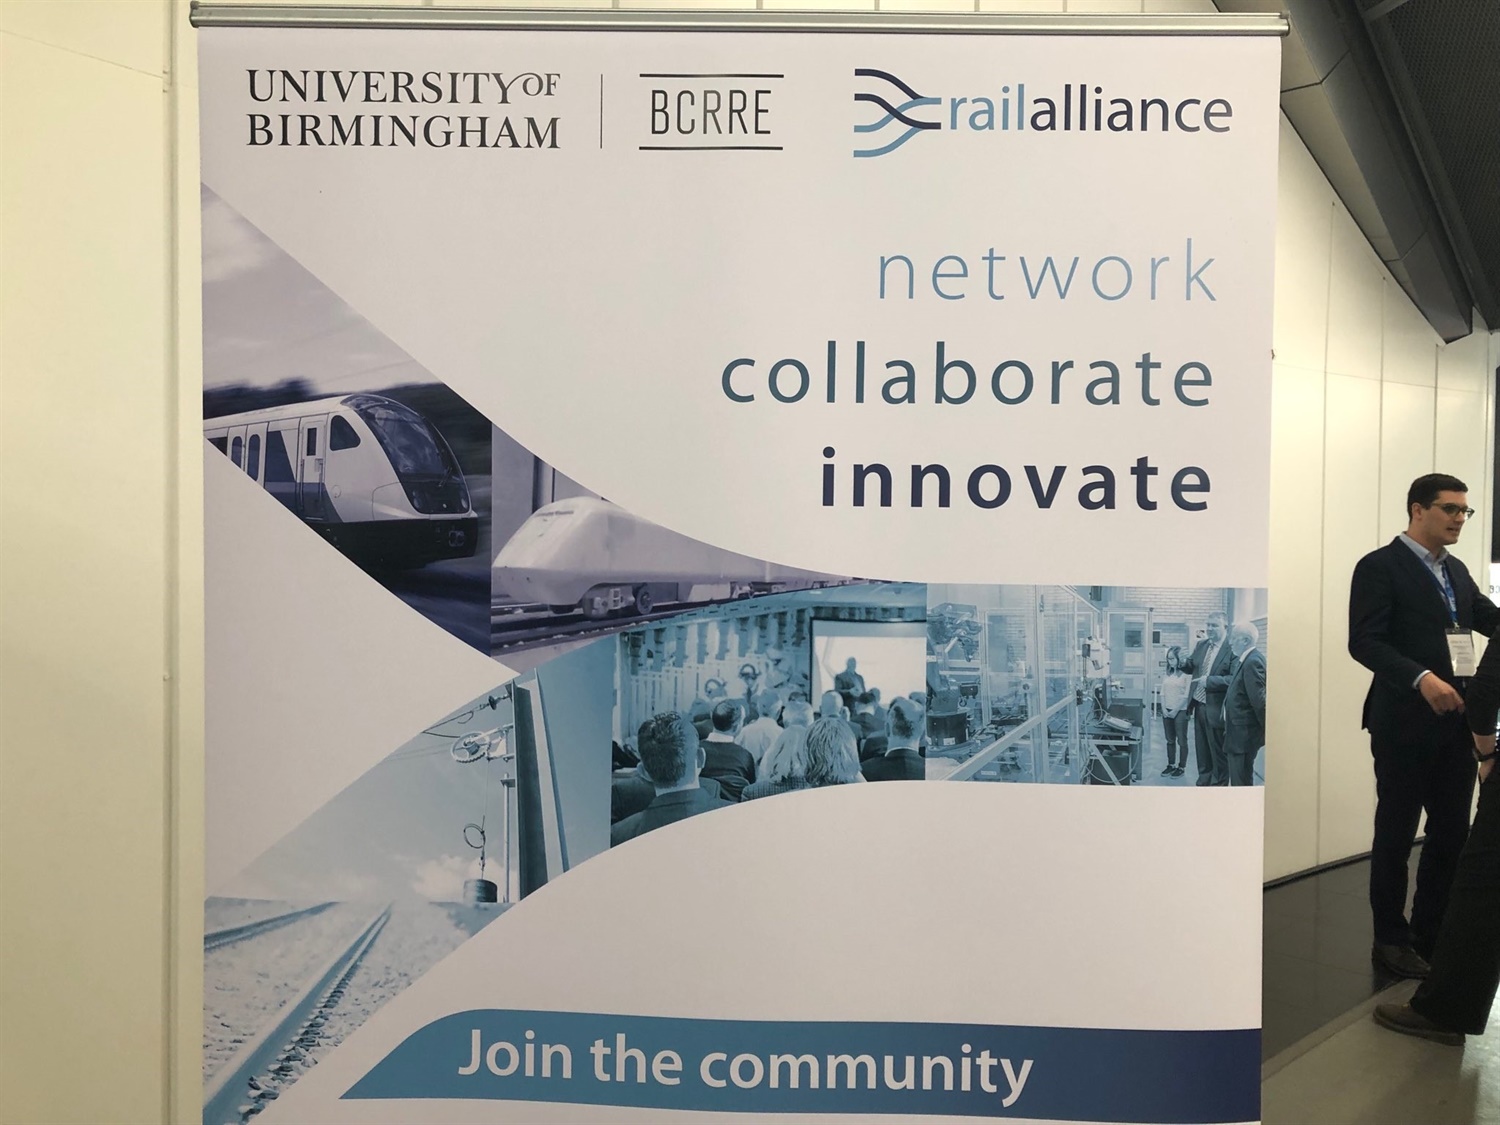 Rail Alliance and University of Birmingham announce union to ‘co-create the railway of the future’